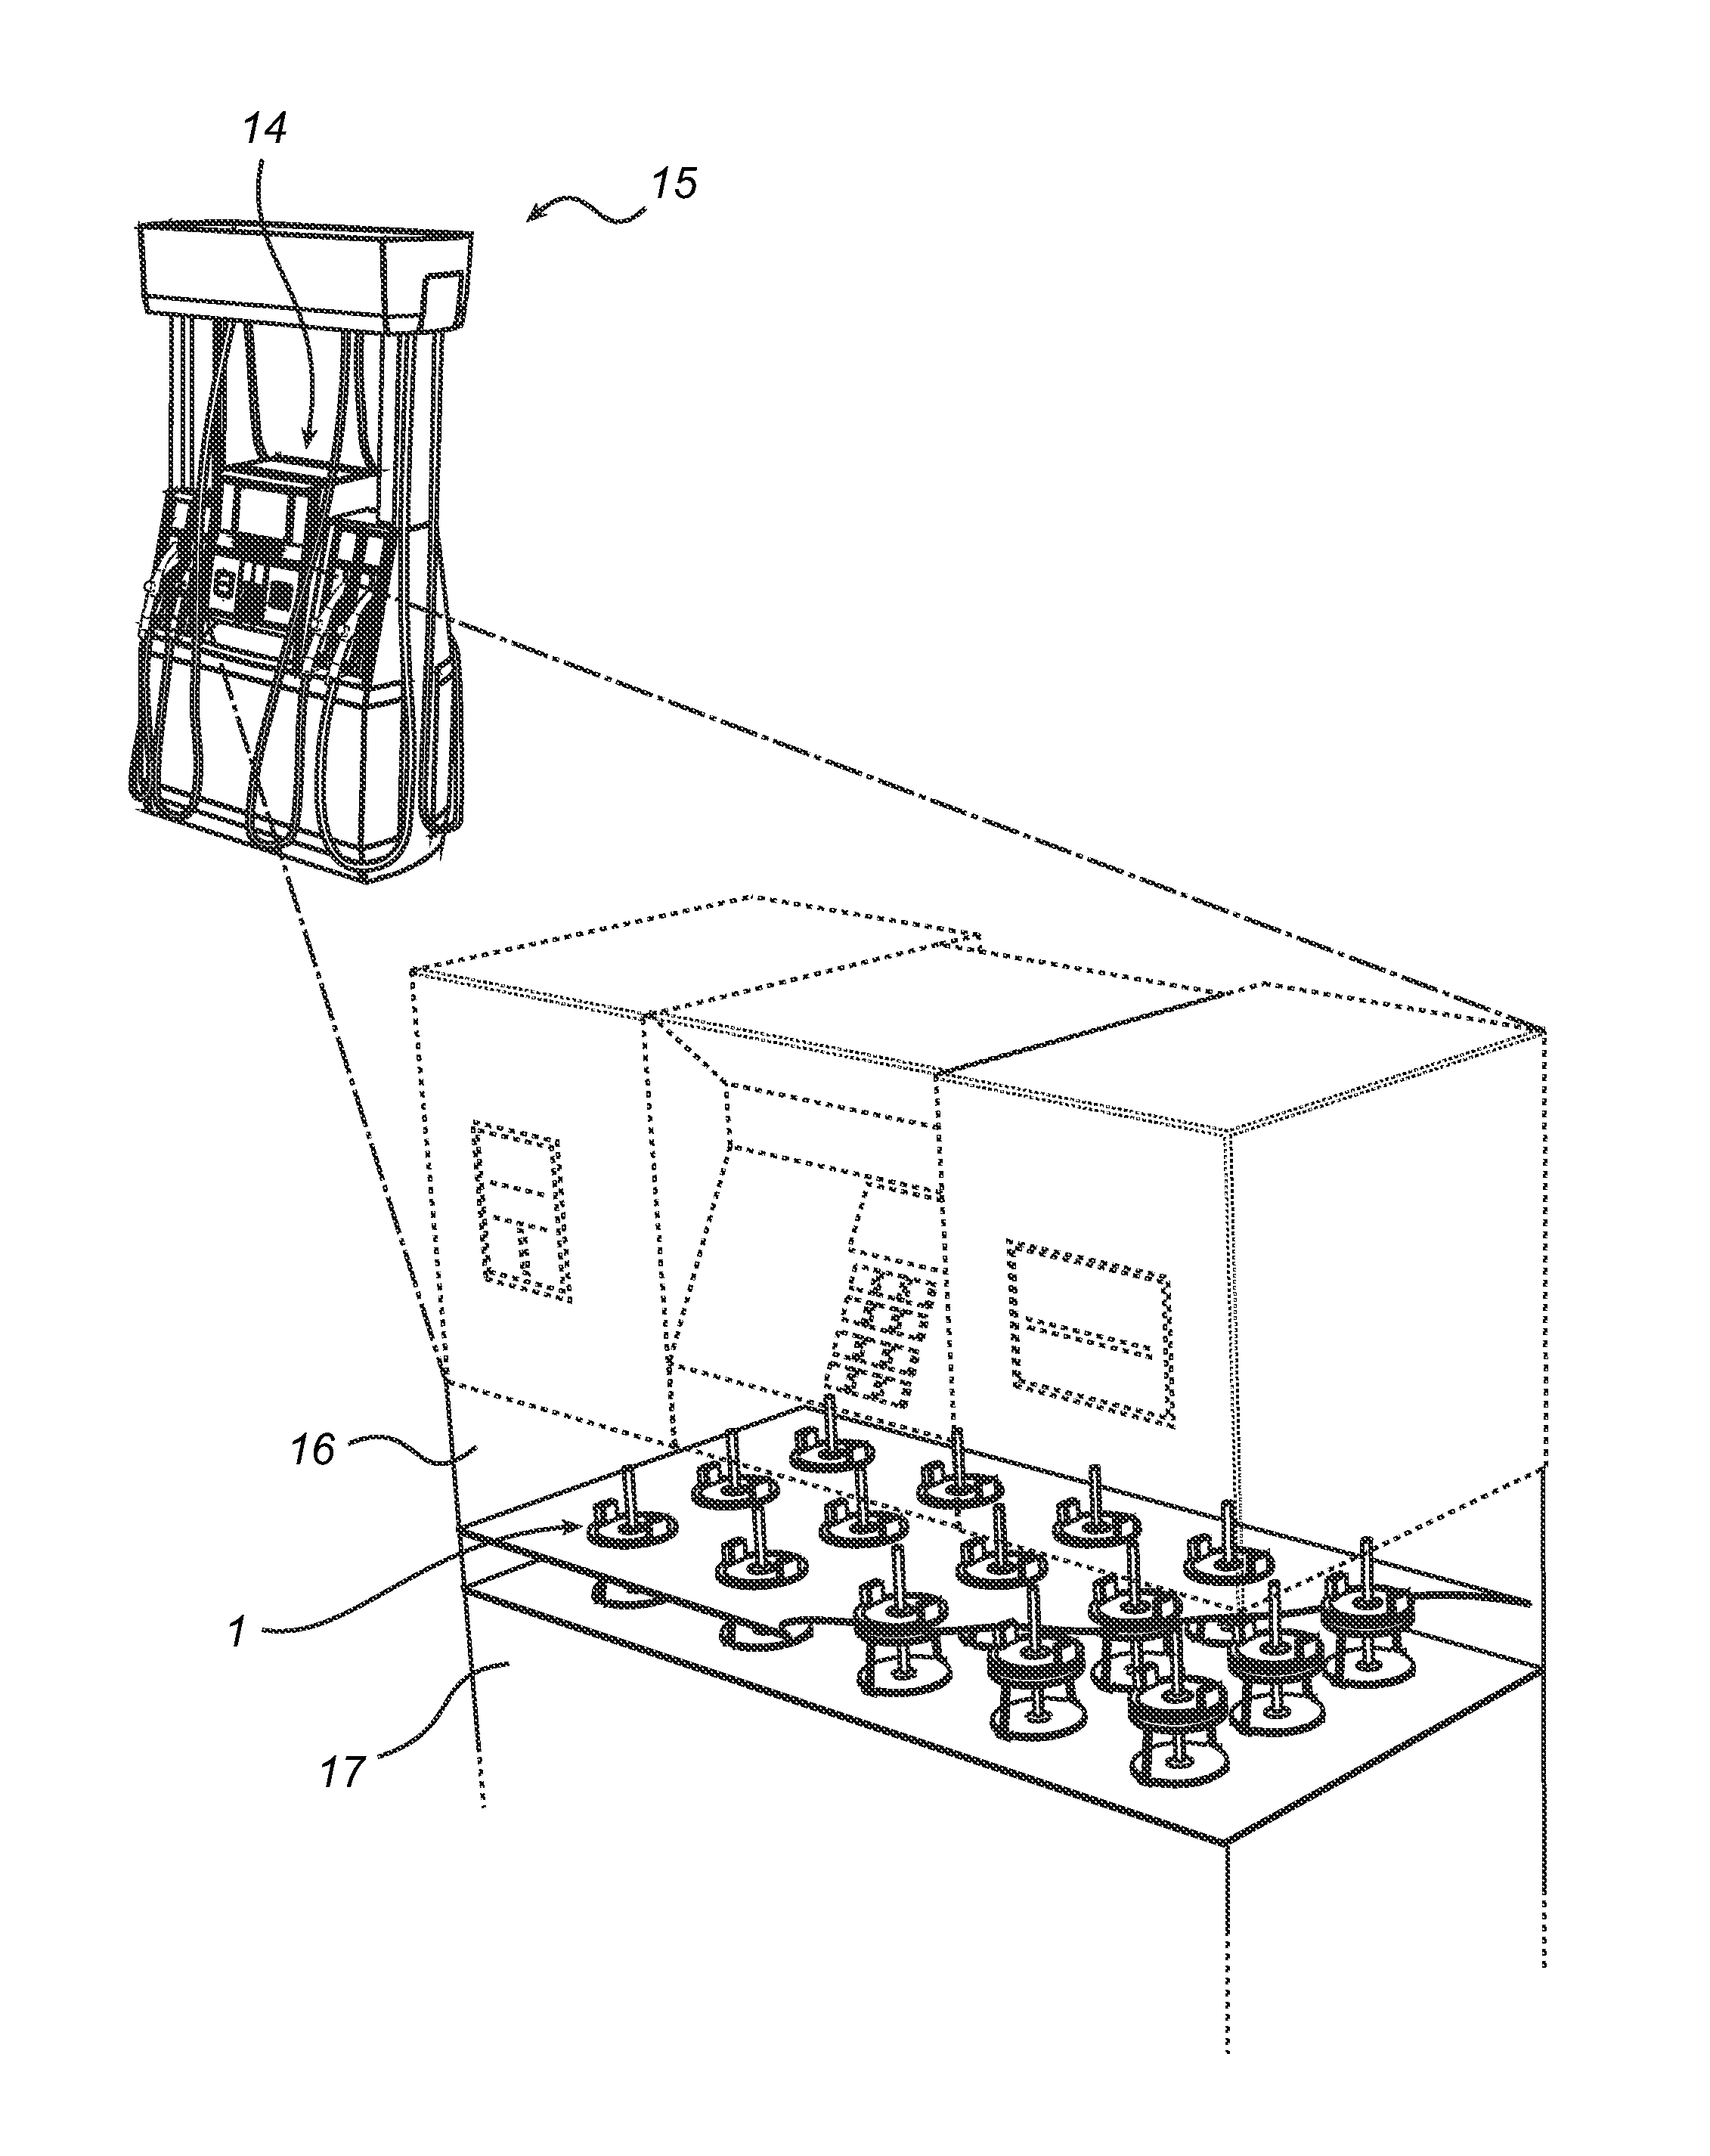 Cable sealing device